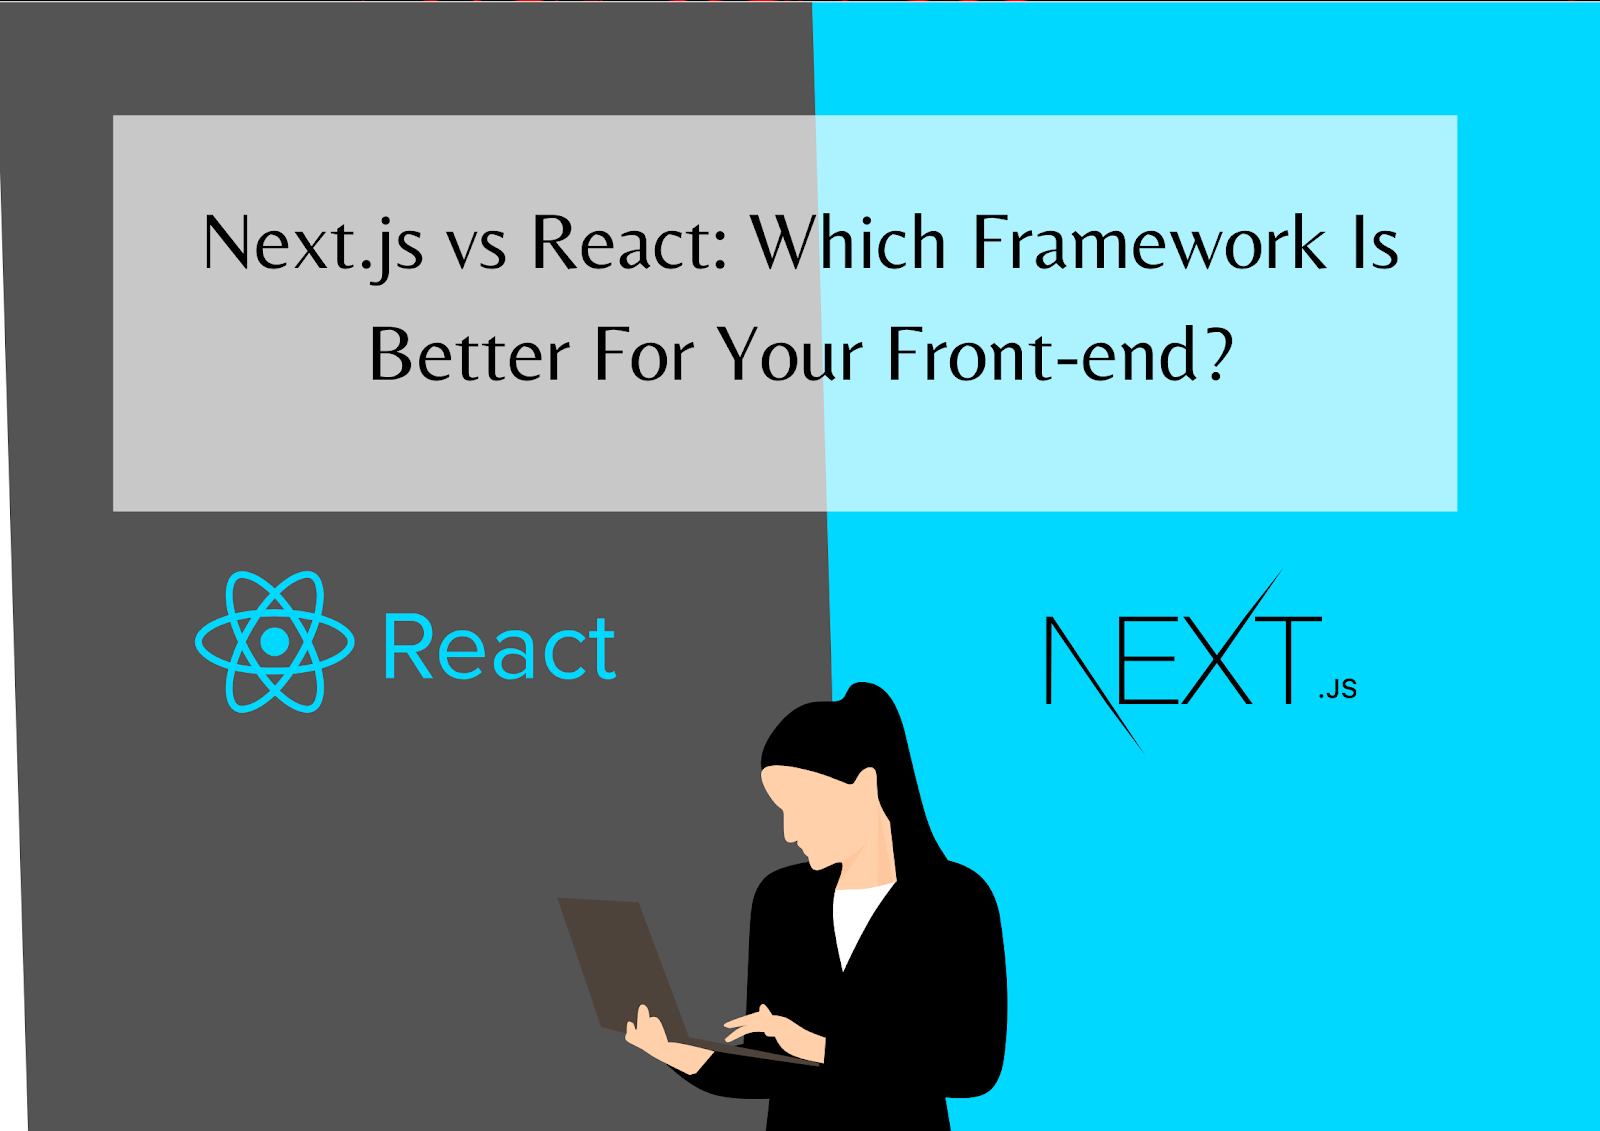 Next.js vs React: Which Framework Is Better For Your Front-end?